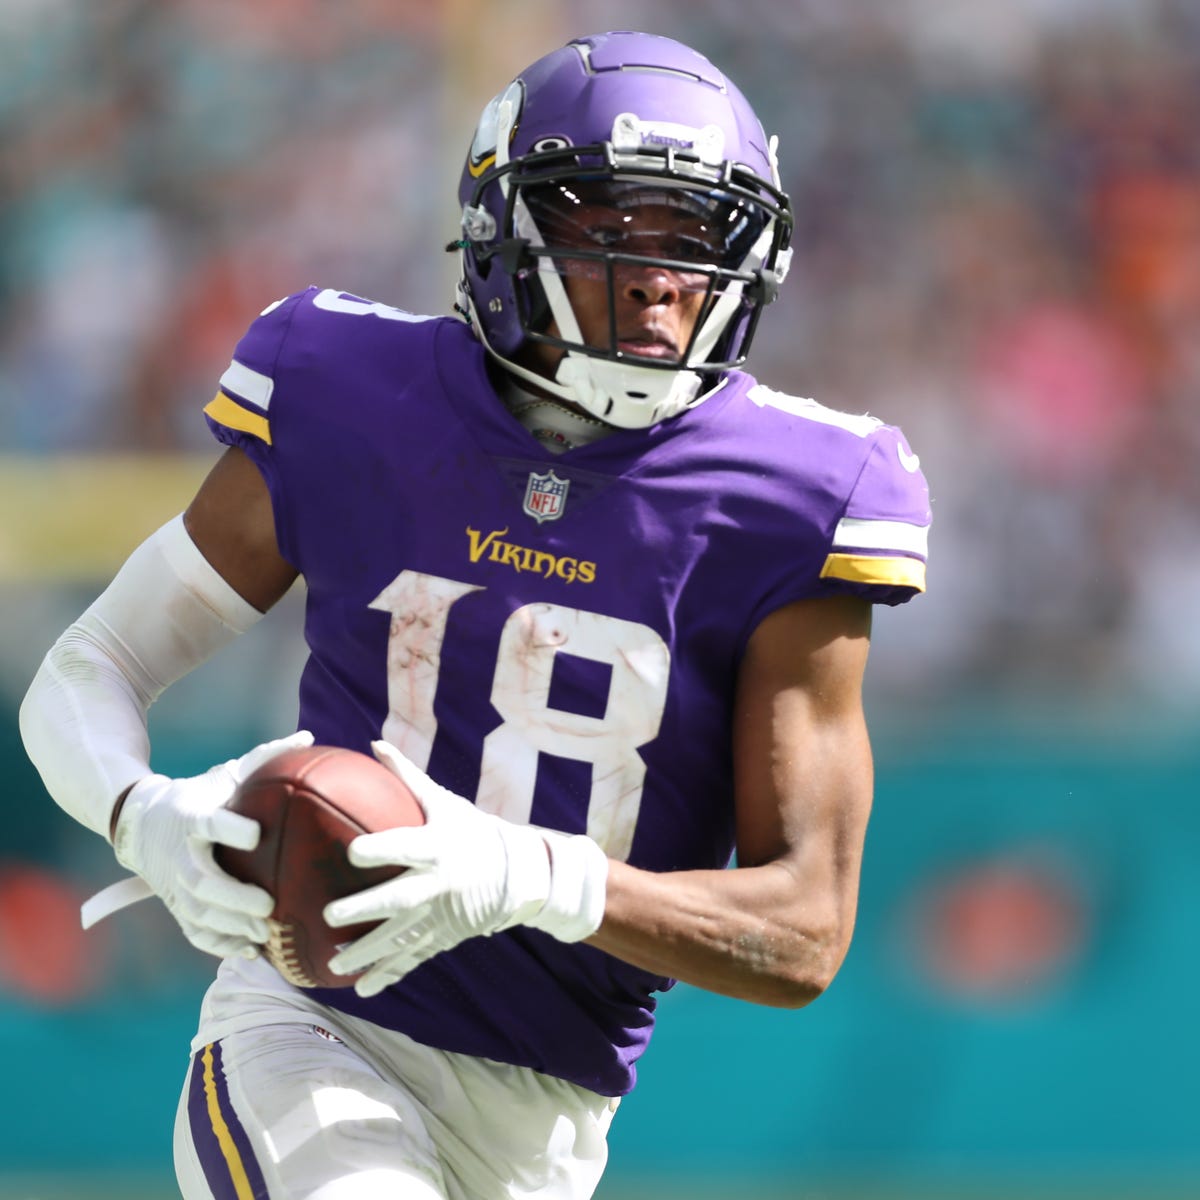 Vikings Game Today: How to Watch, Livestream NFL Week 11 - CNET